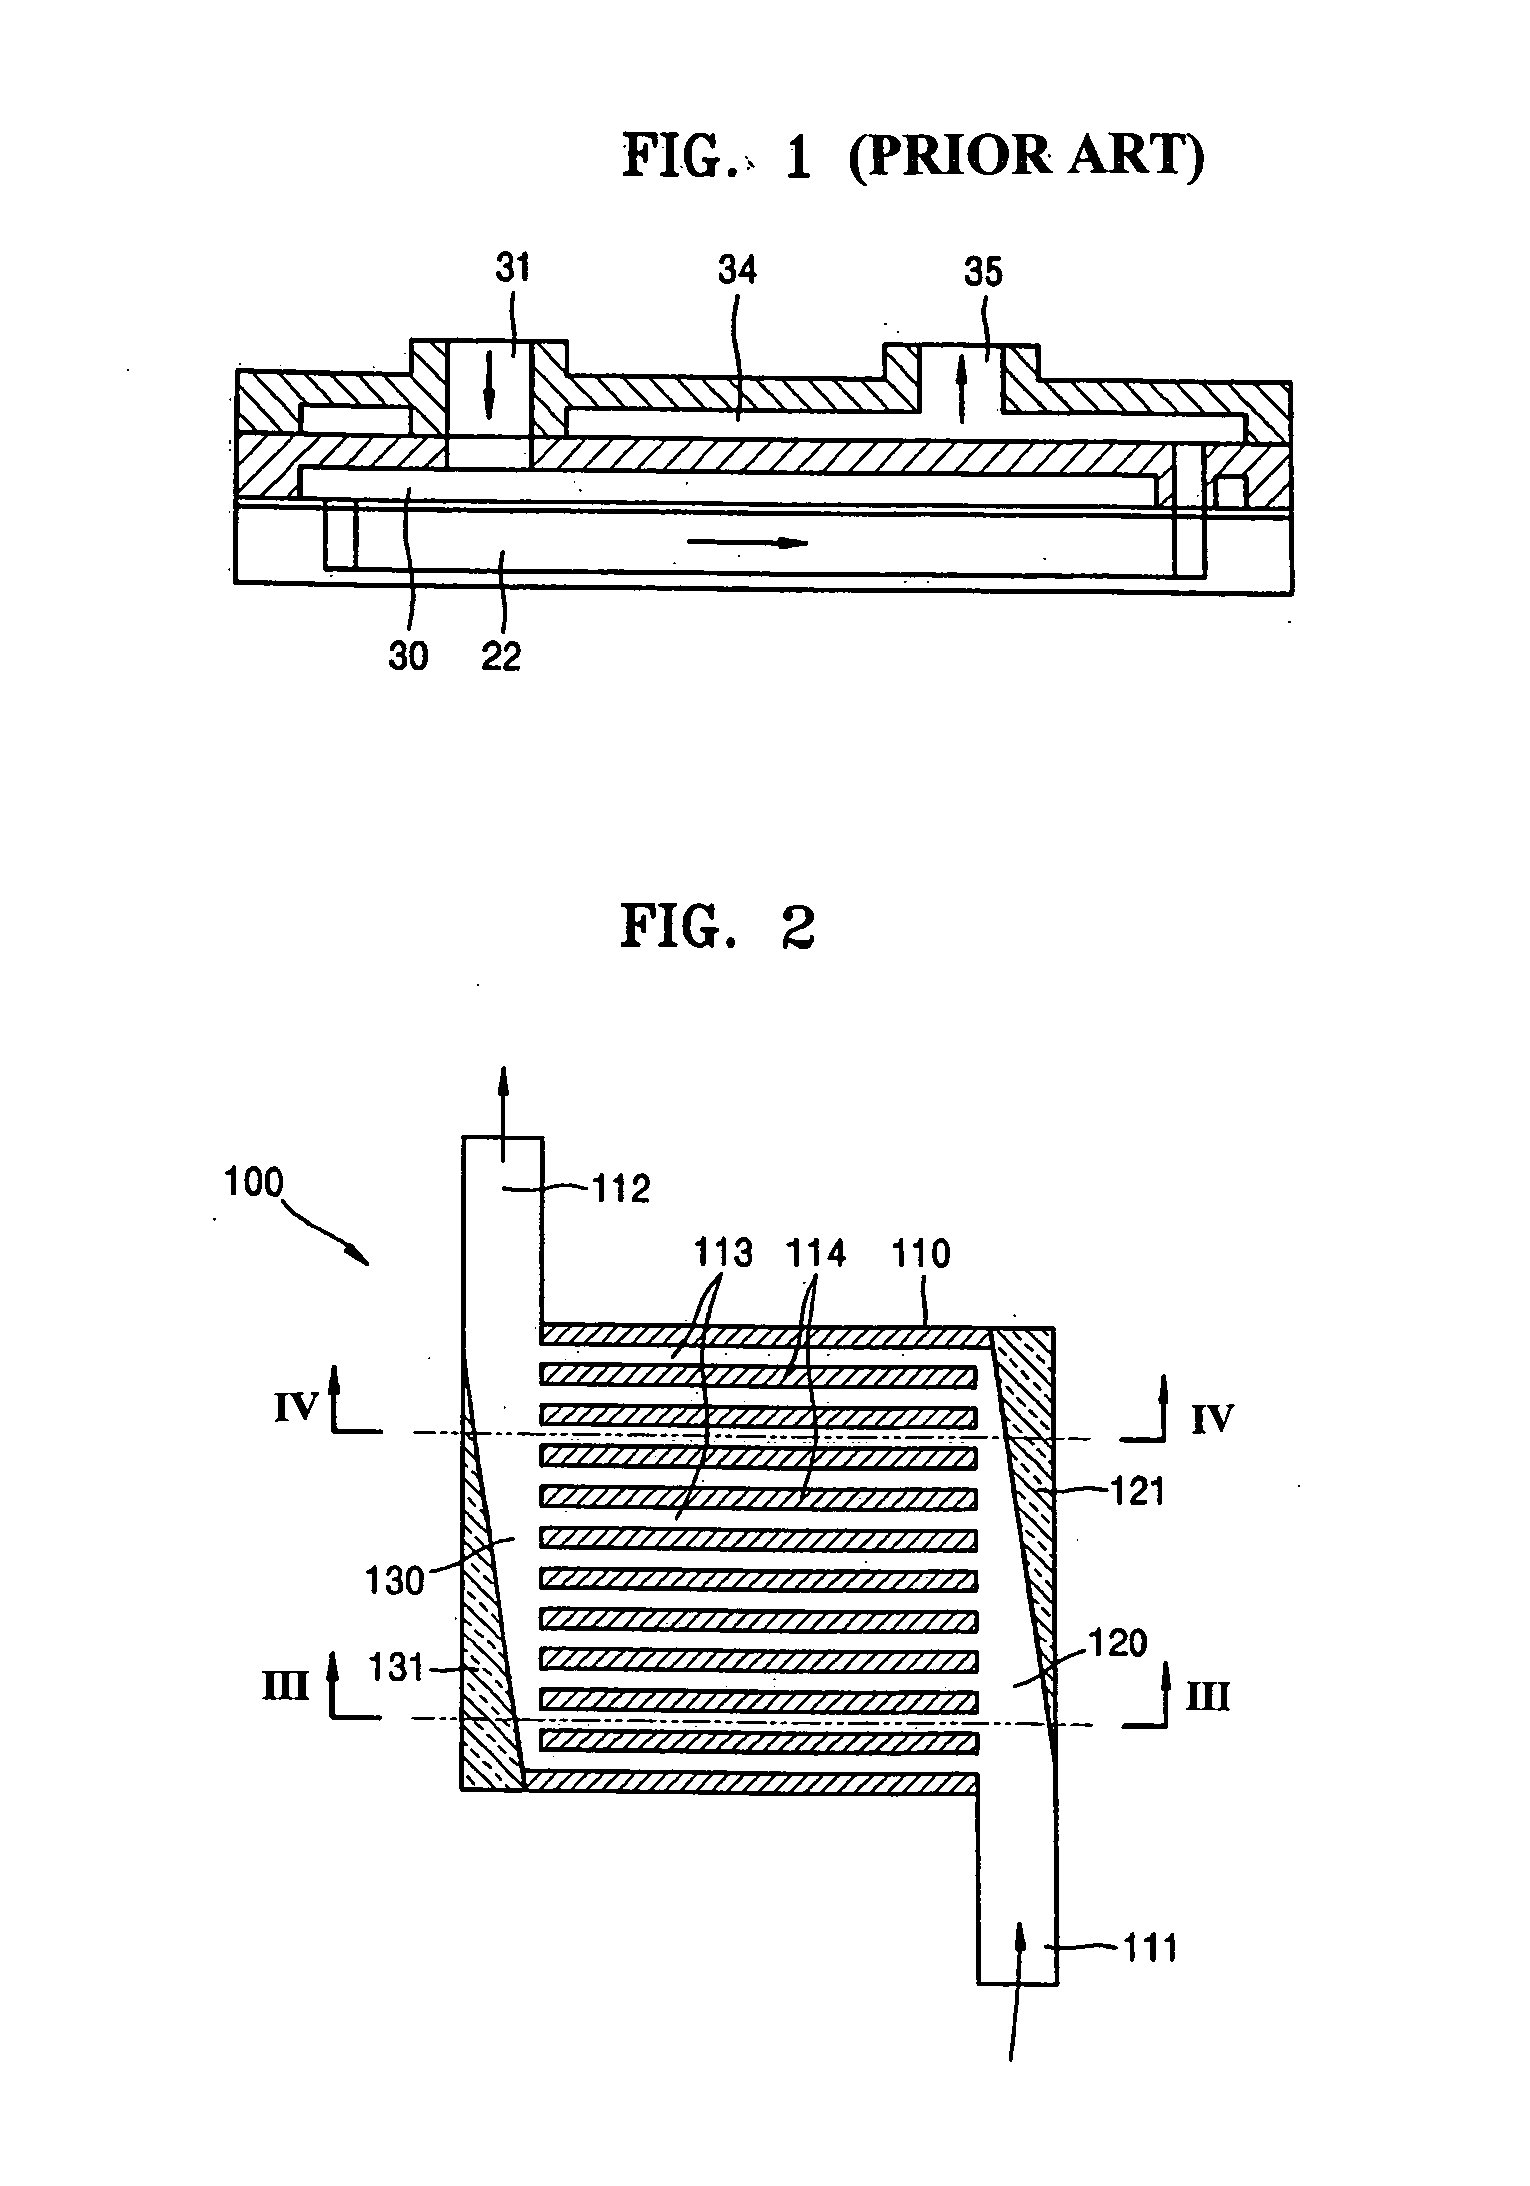 Heat sink apparatus for electronic device